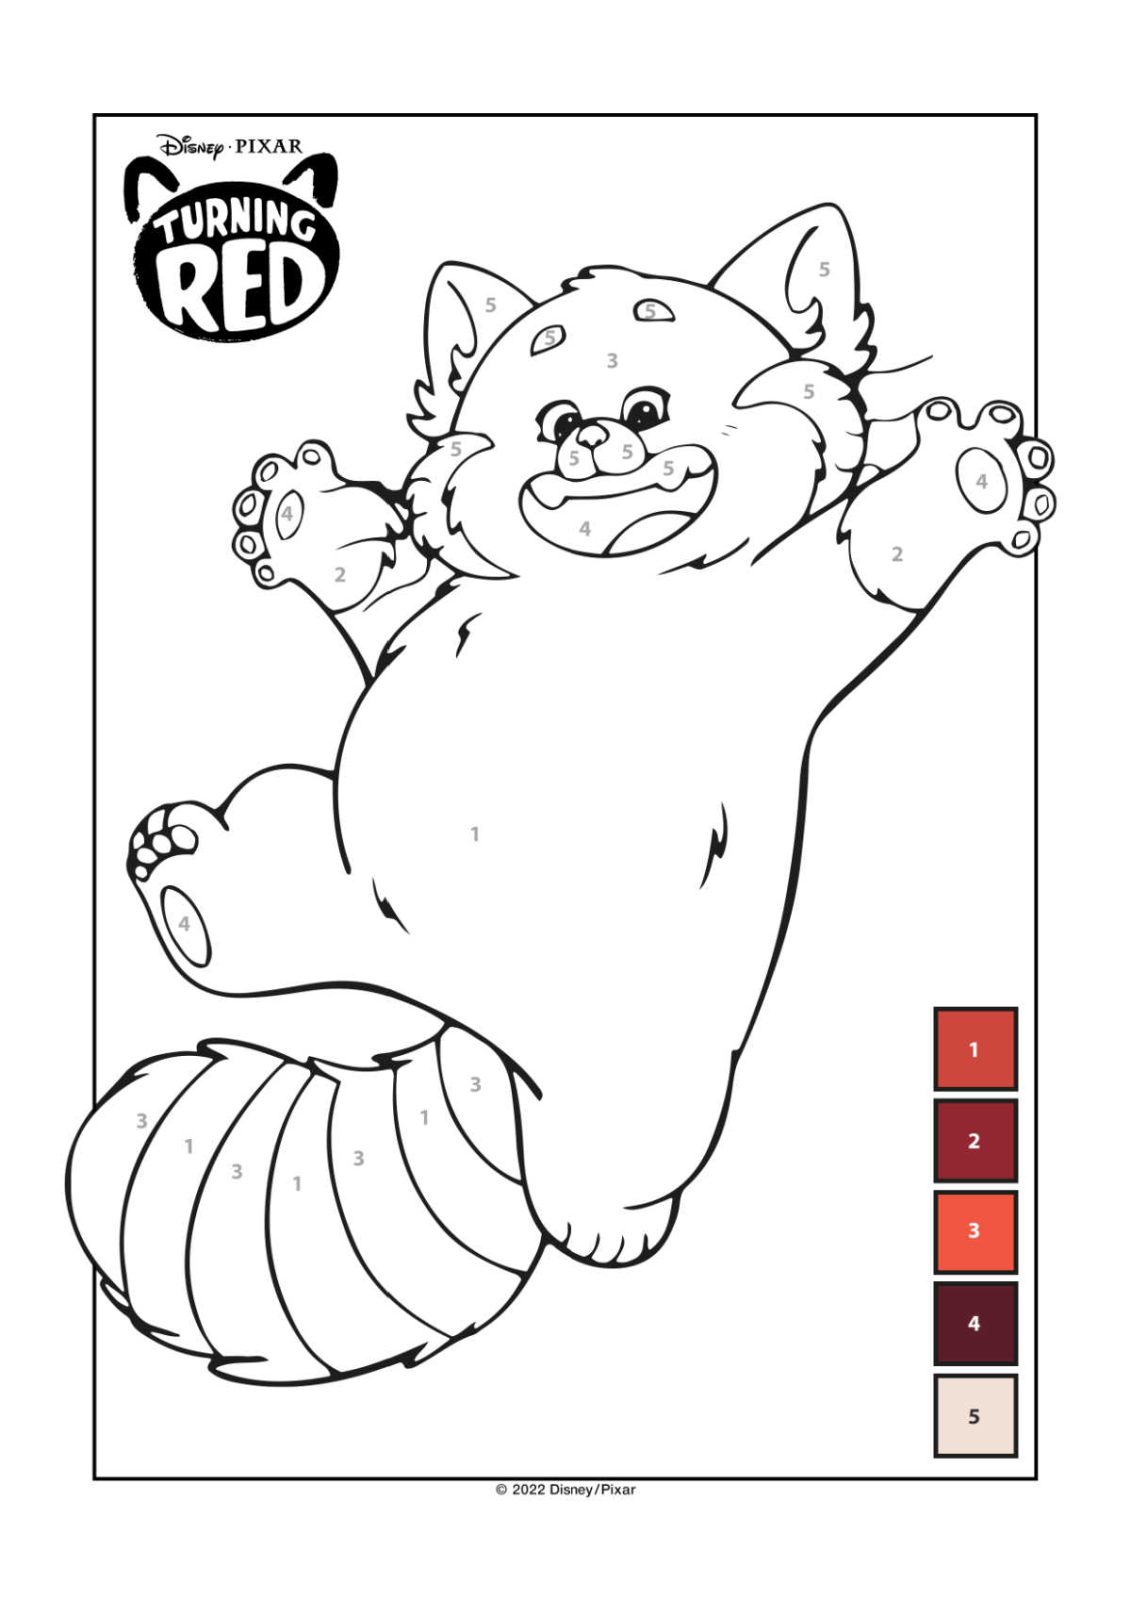 Download the Turning Red color by number activity, so that your child can enjoy this coloring page with a fun challenge built in.